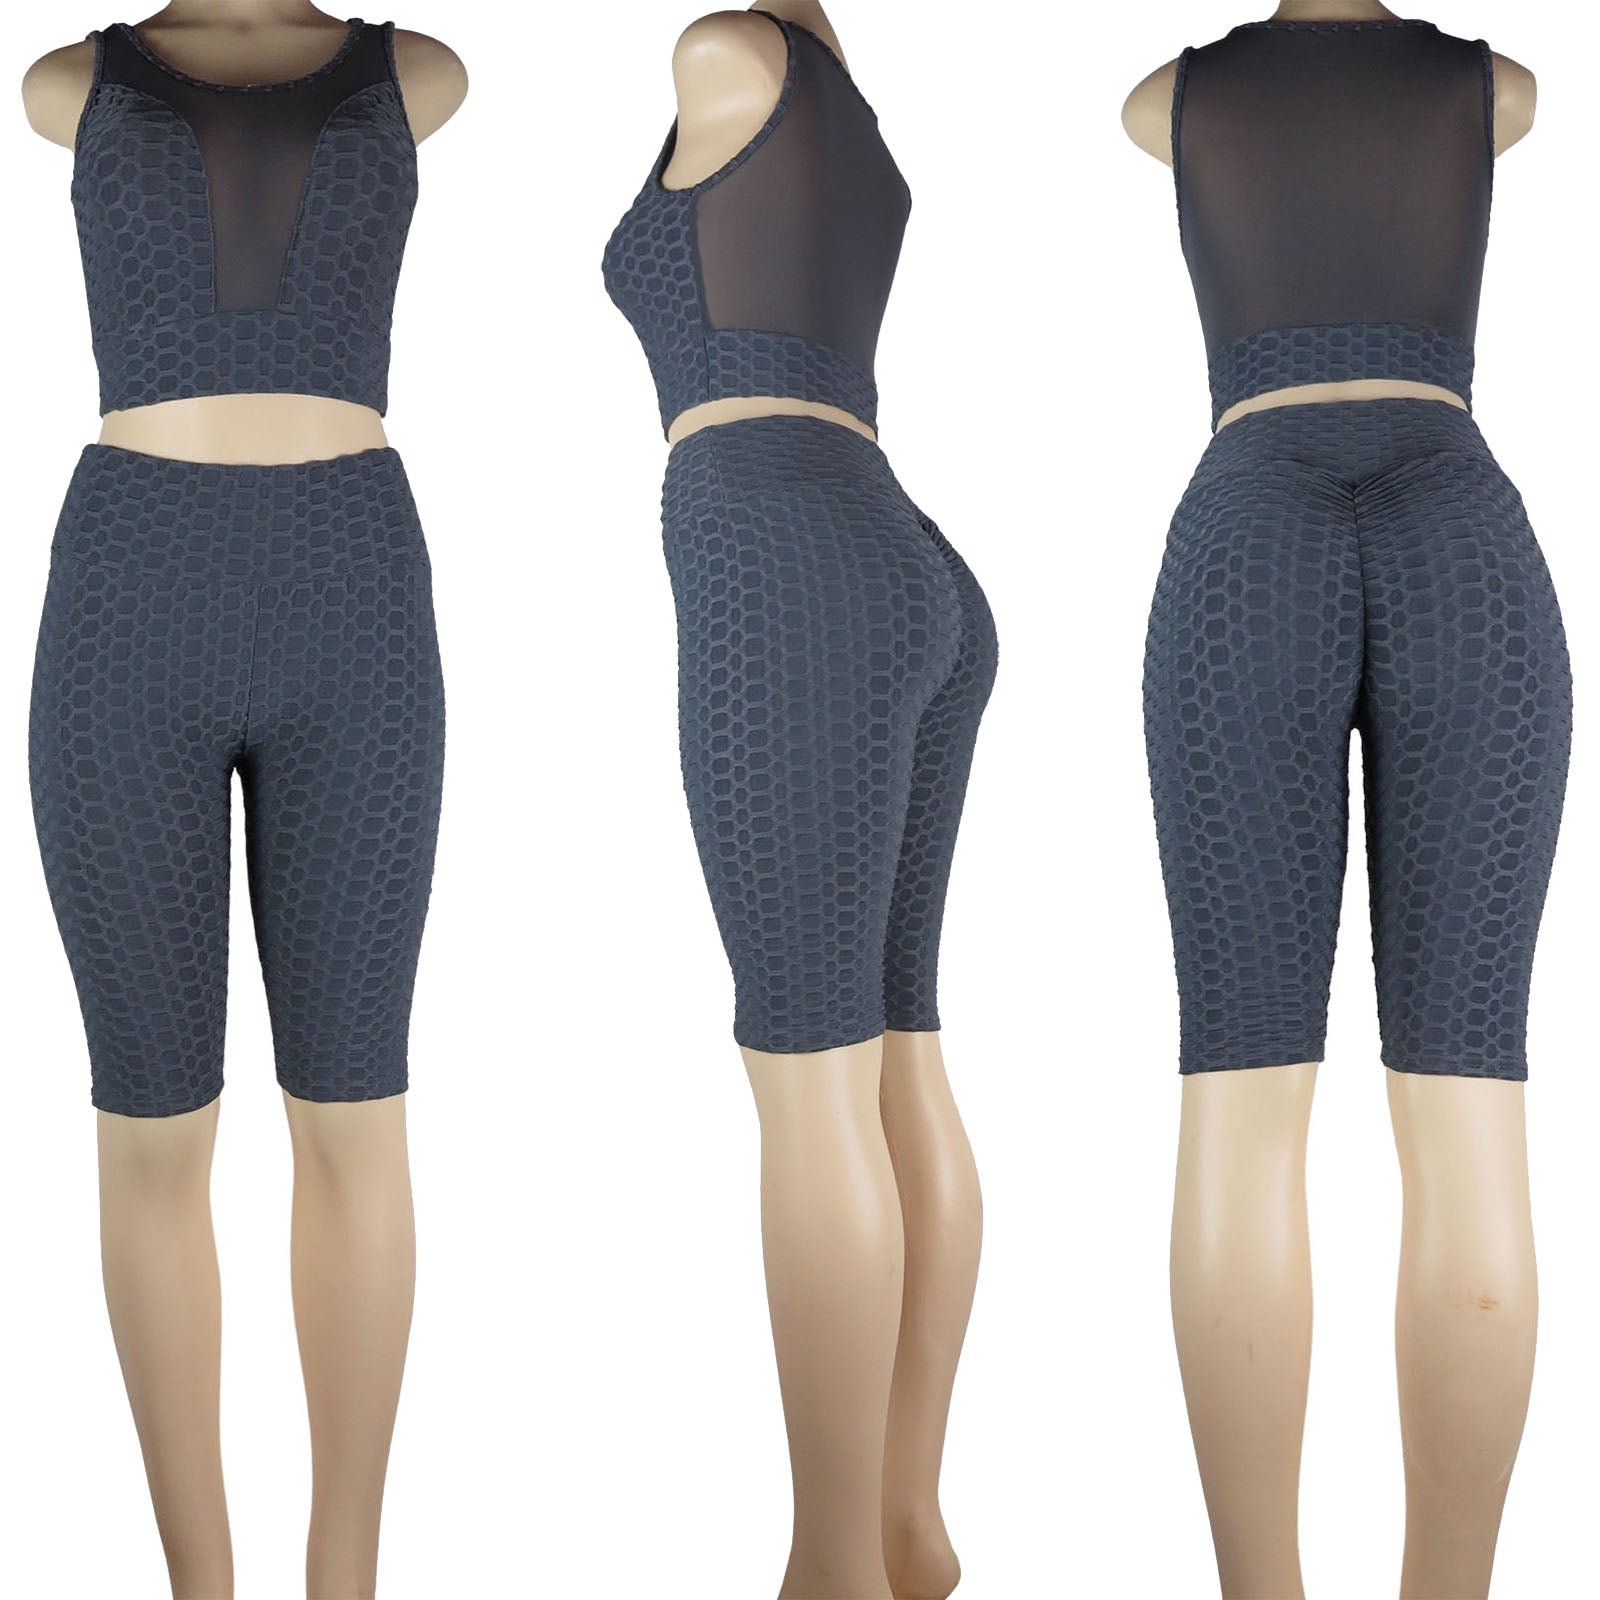 Wholesale TikTok bike shorts set with mesh and scrunch butt bubble design in gray